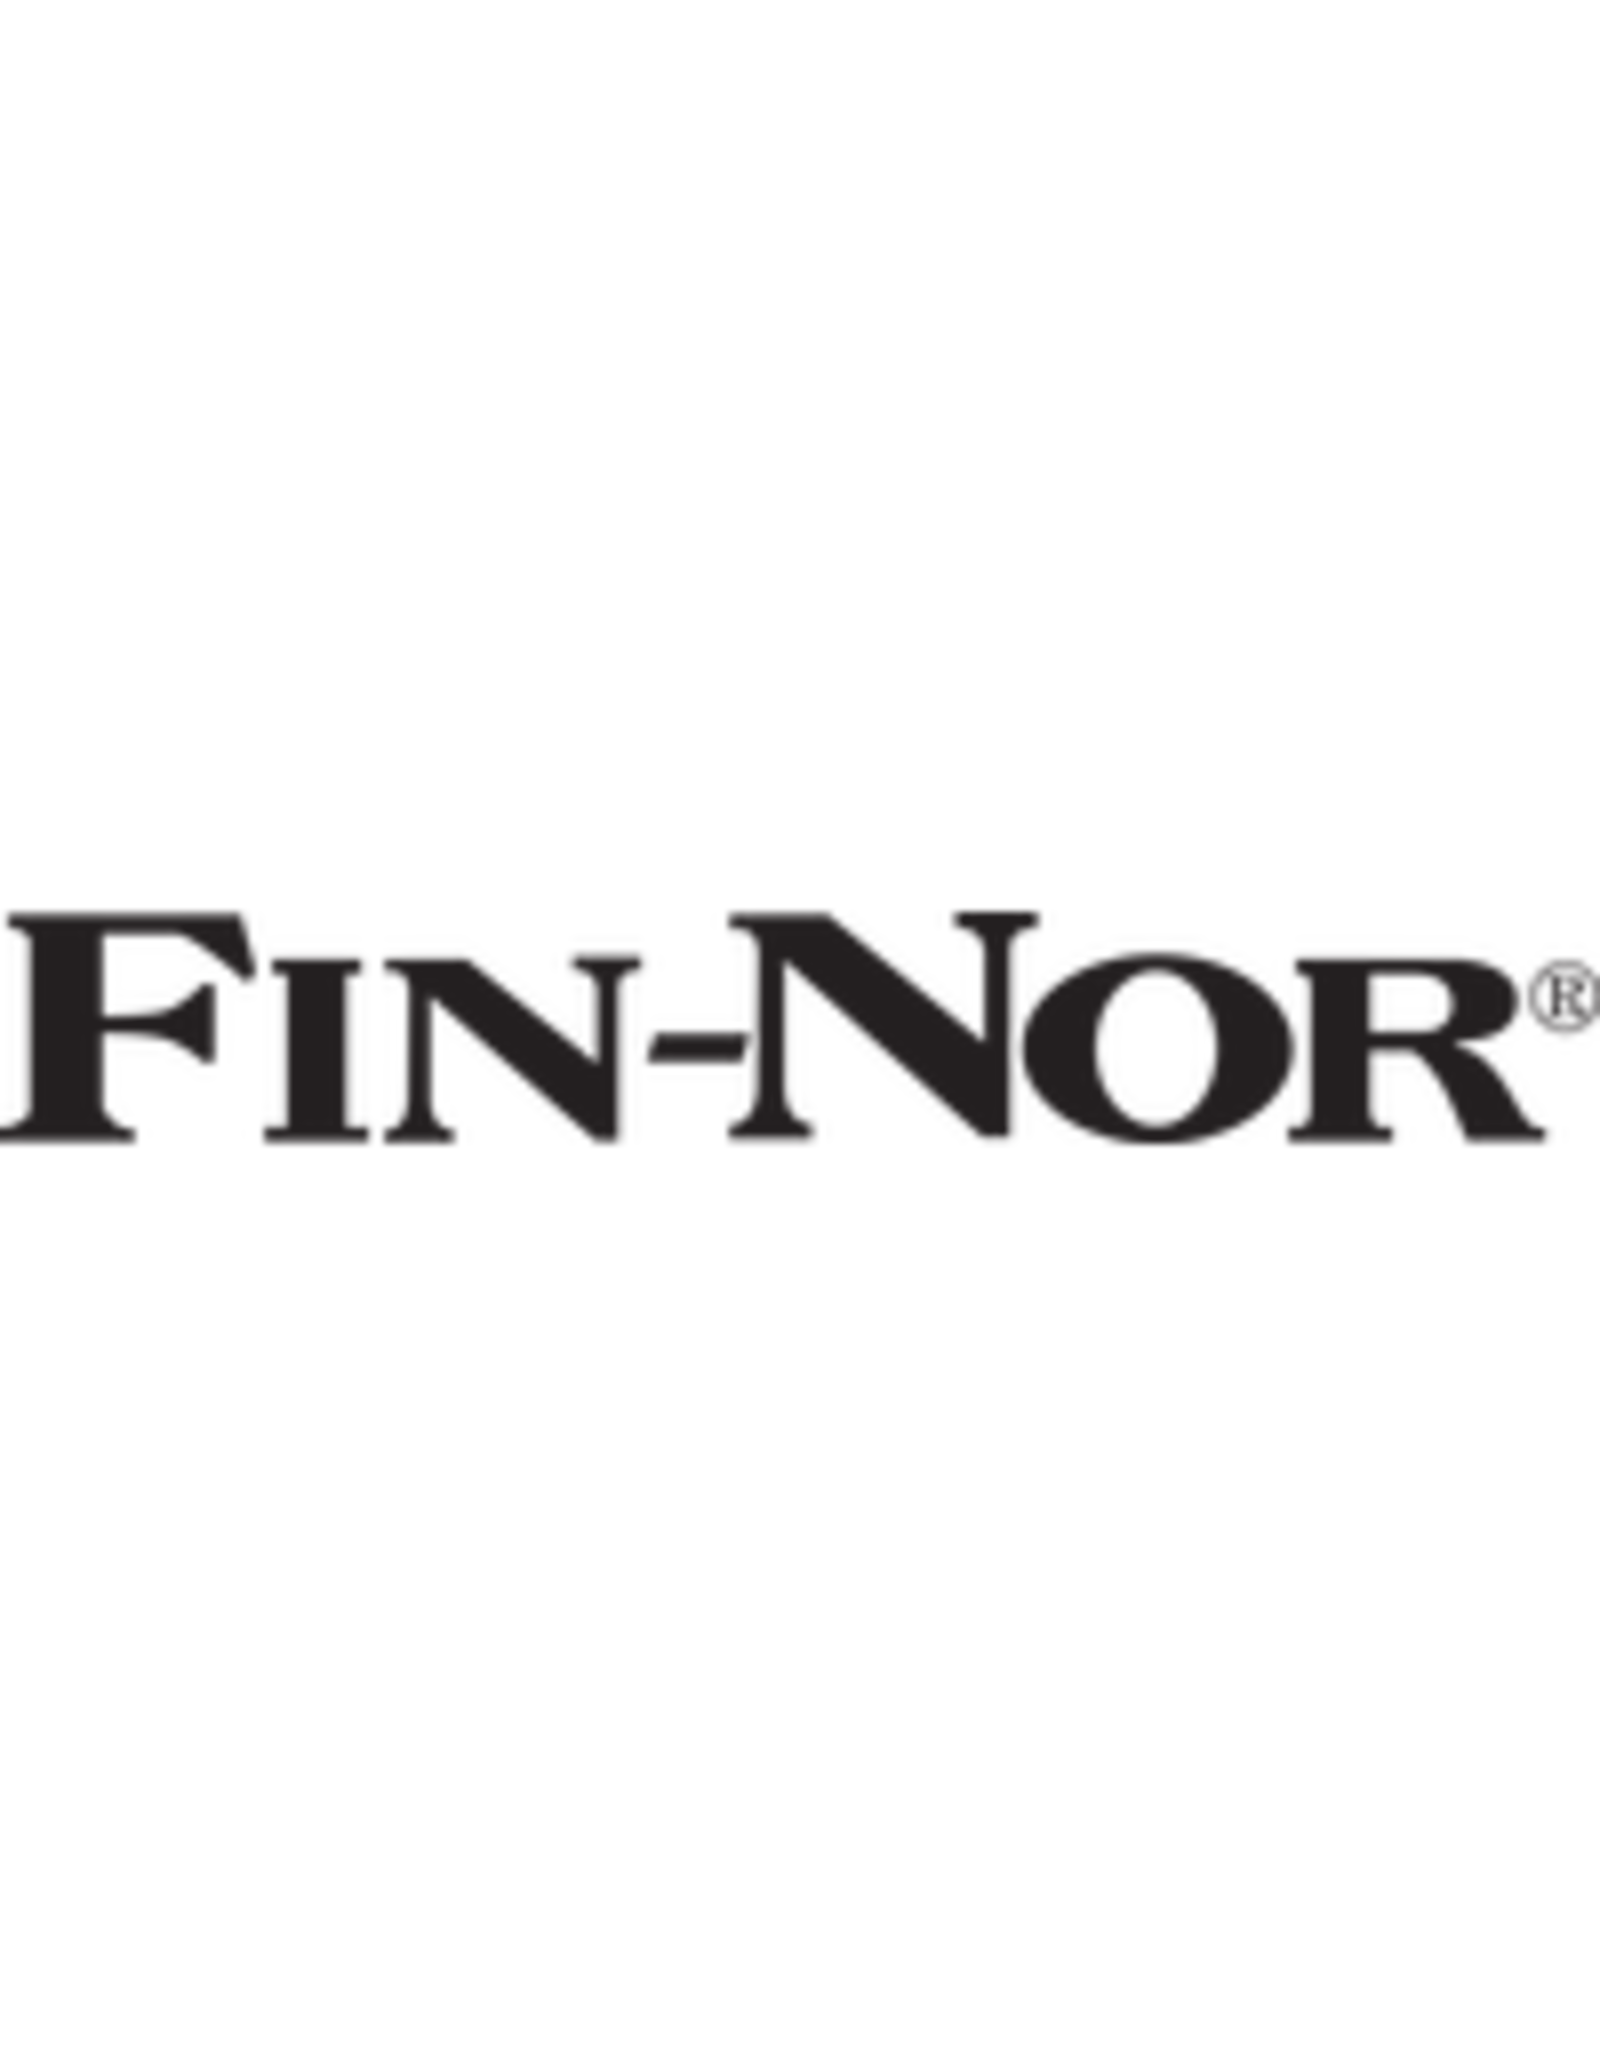 Fin-Nor DRAG FRICTION WASHER